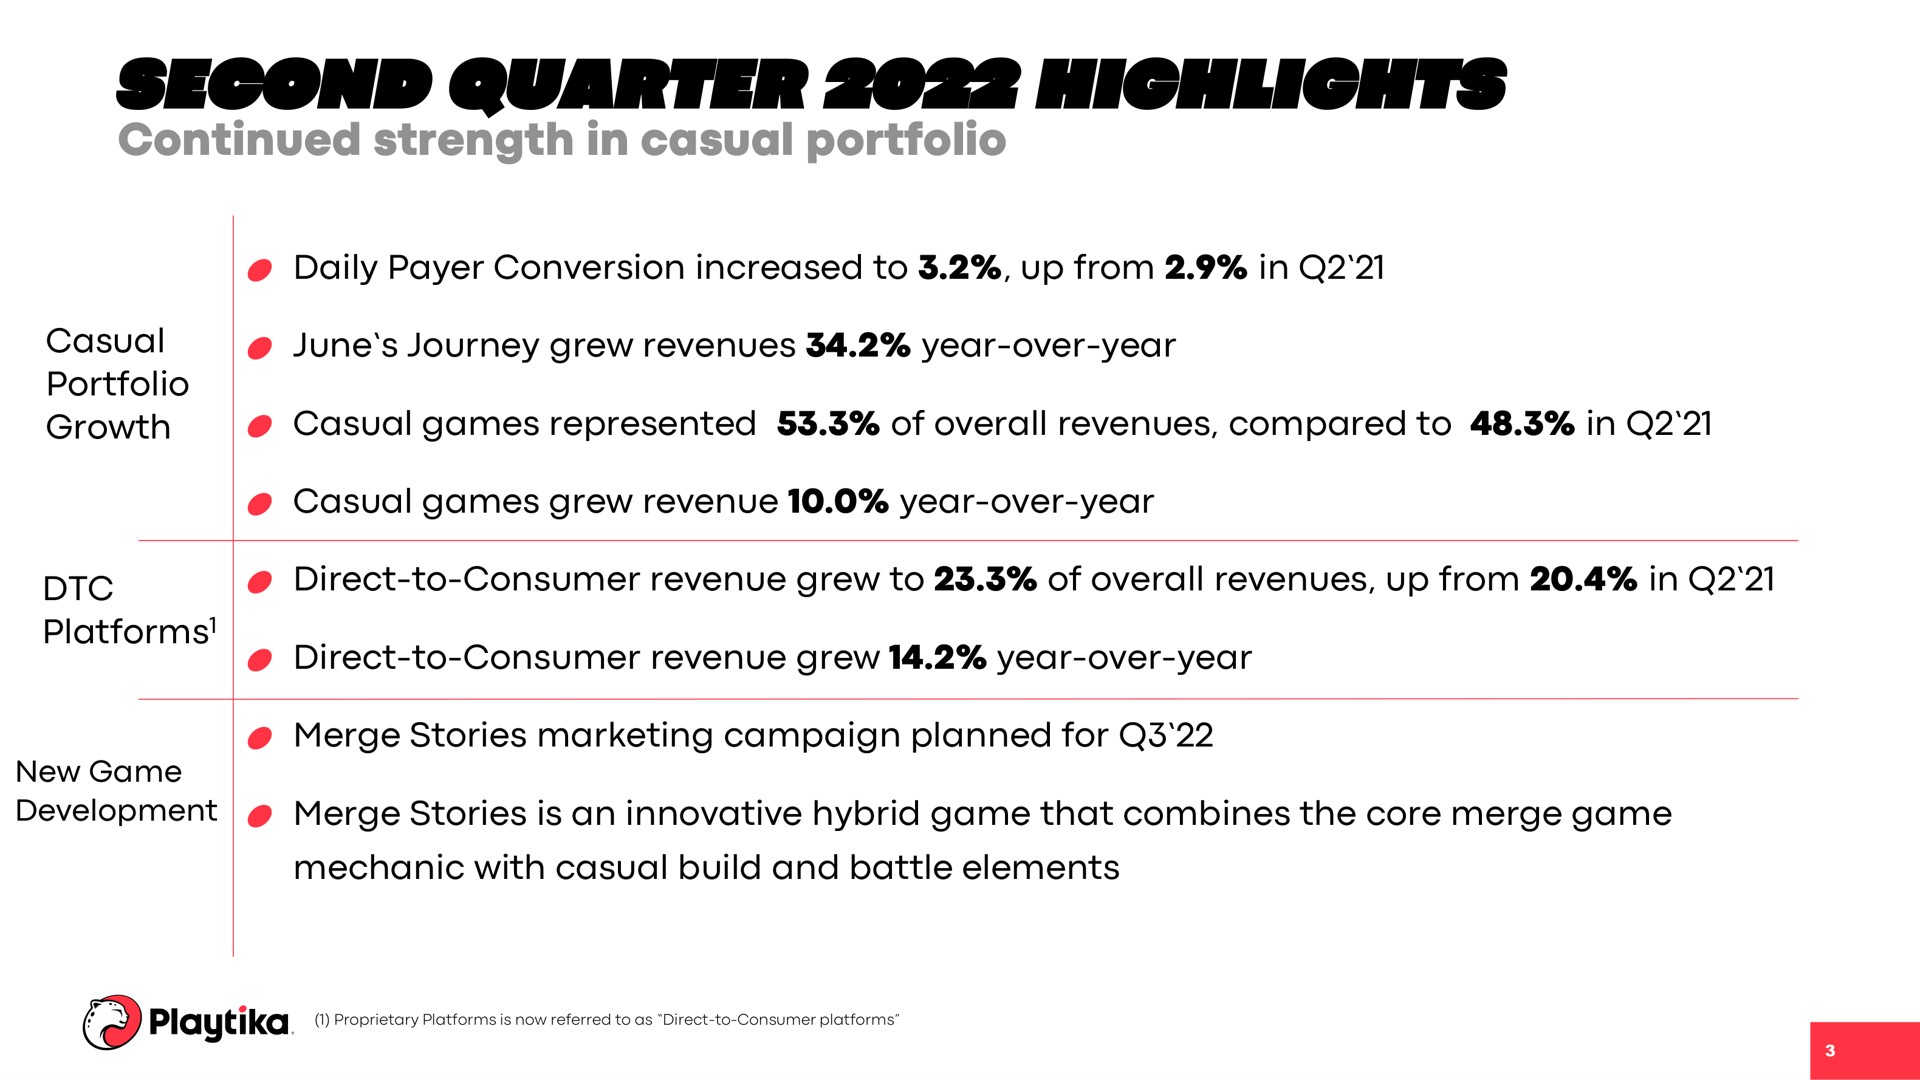 second quarter highlights casual portfolio growth daily payer conversion increased to up from in june journey grew revenues year over year casual games represented of overall revenues compared to in casual games grew revenue year over year direct to consumer revenue grew to of overall revenues up from in platforms direct to consumer revenue grew year over year merge stories marketing campaign planned for development merge stories is an innovative hybrid game that combines the core merge game mechanic with casual build and battle elements | Playtika